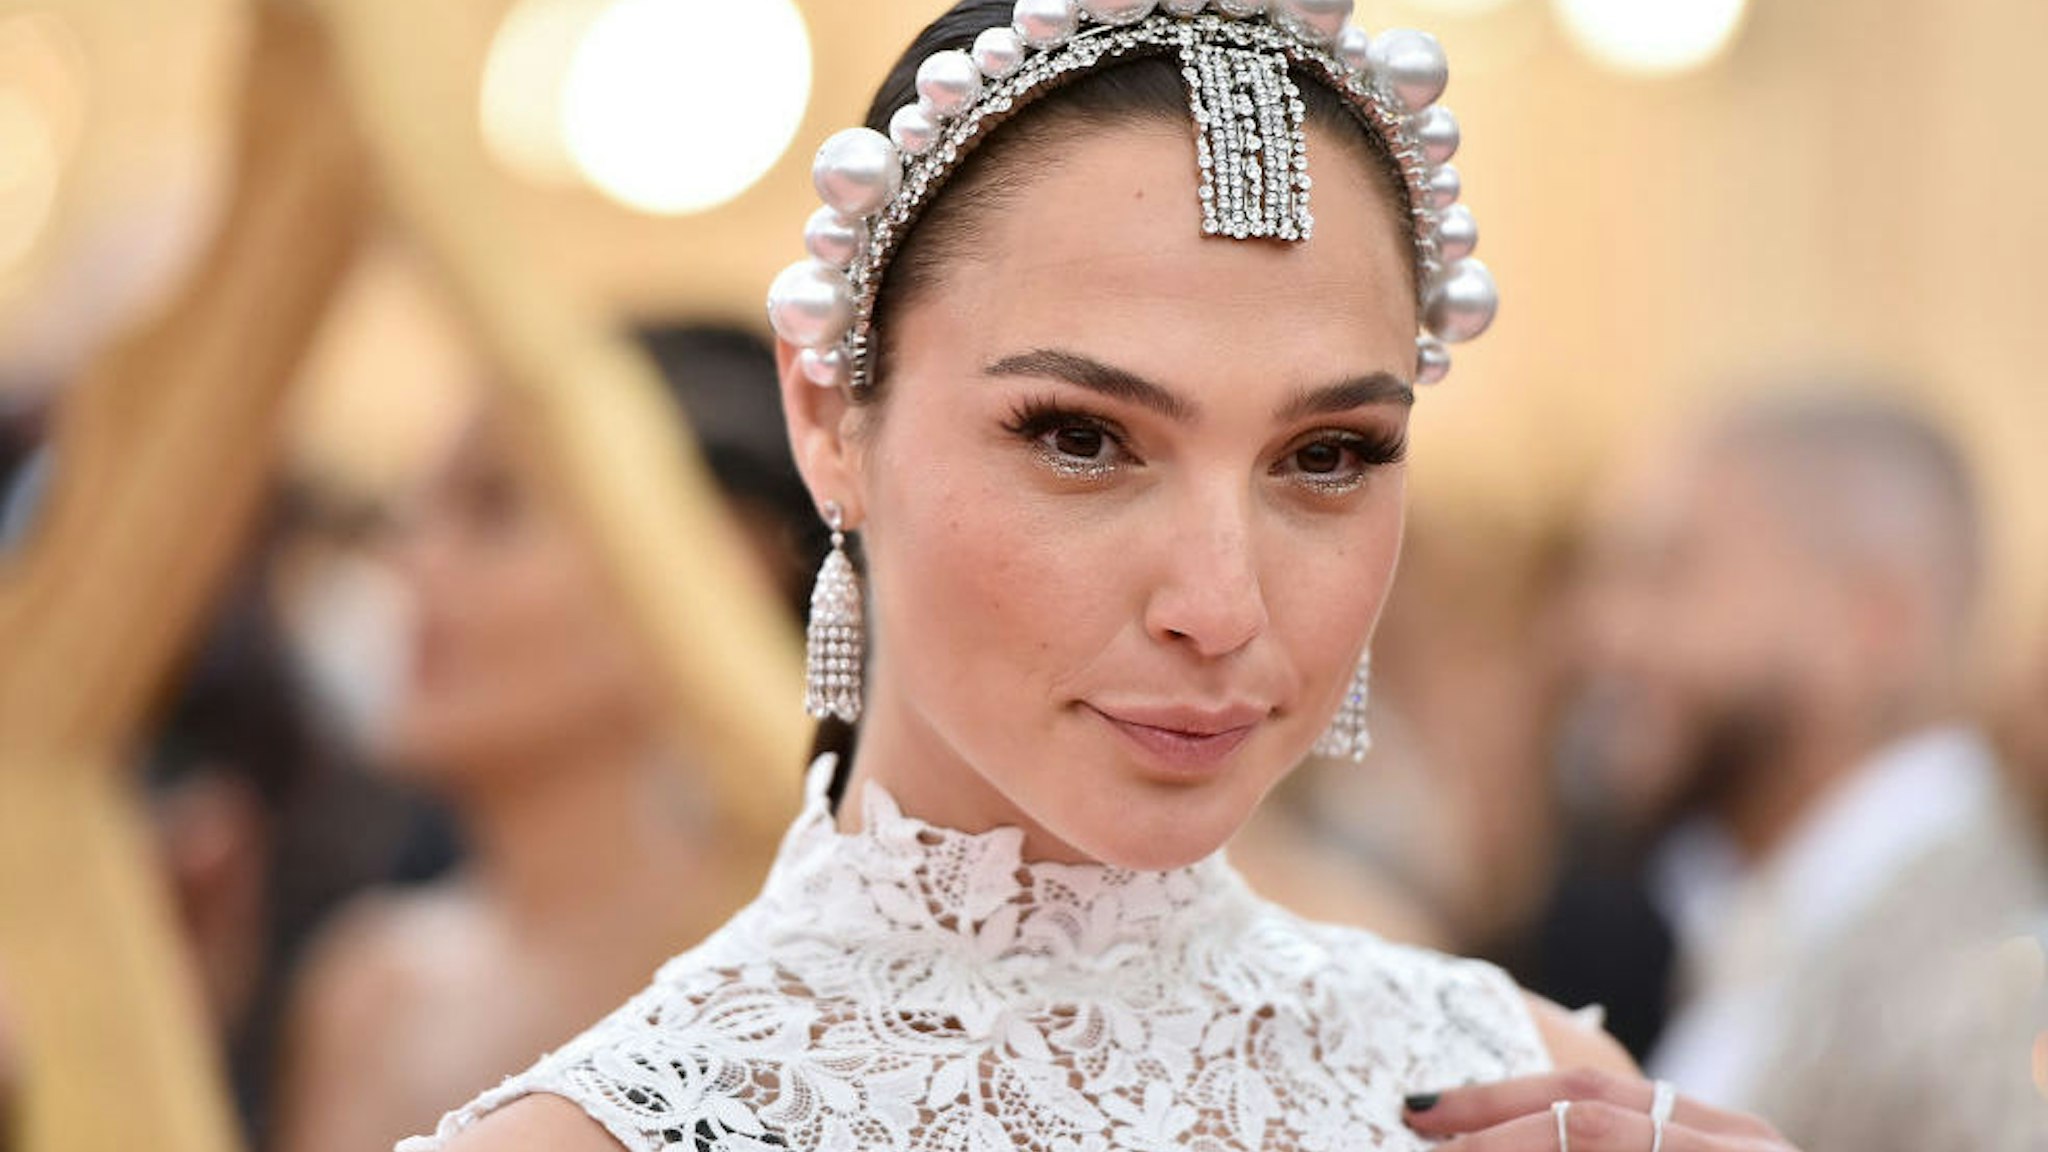 Gal Gadot attends The 2019 Met Gala Celebrating Camp: Notes on Fashion at Metropolitan Museum of Art on May 06, 2019 in New York City.